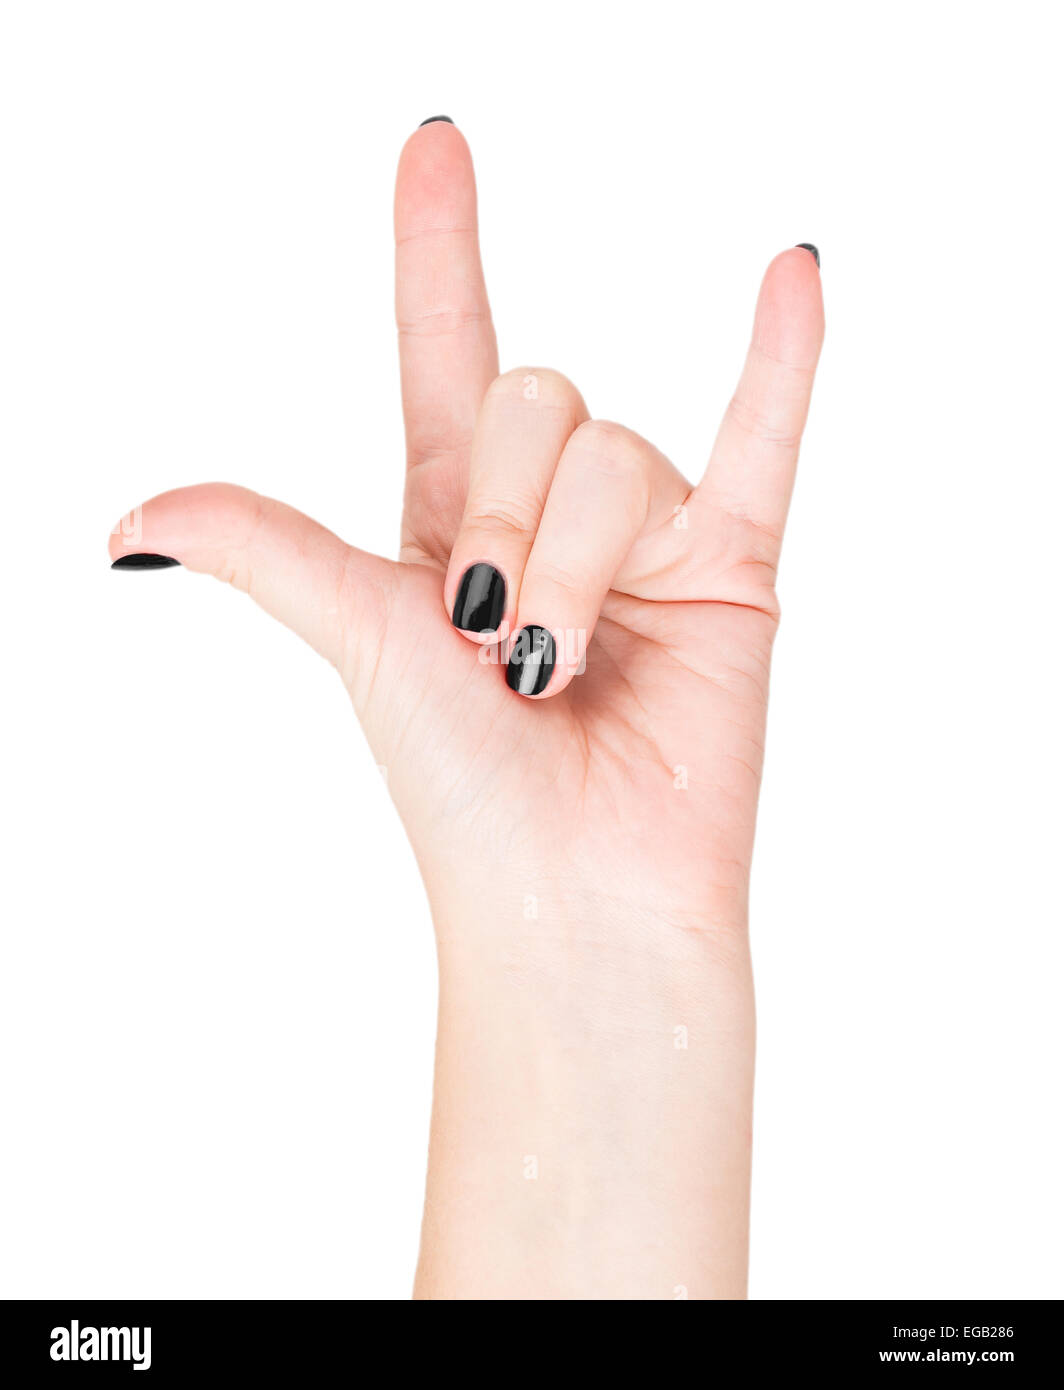 Heavy metal fingers isolated on white background Stock Photo